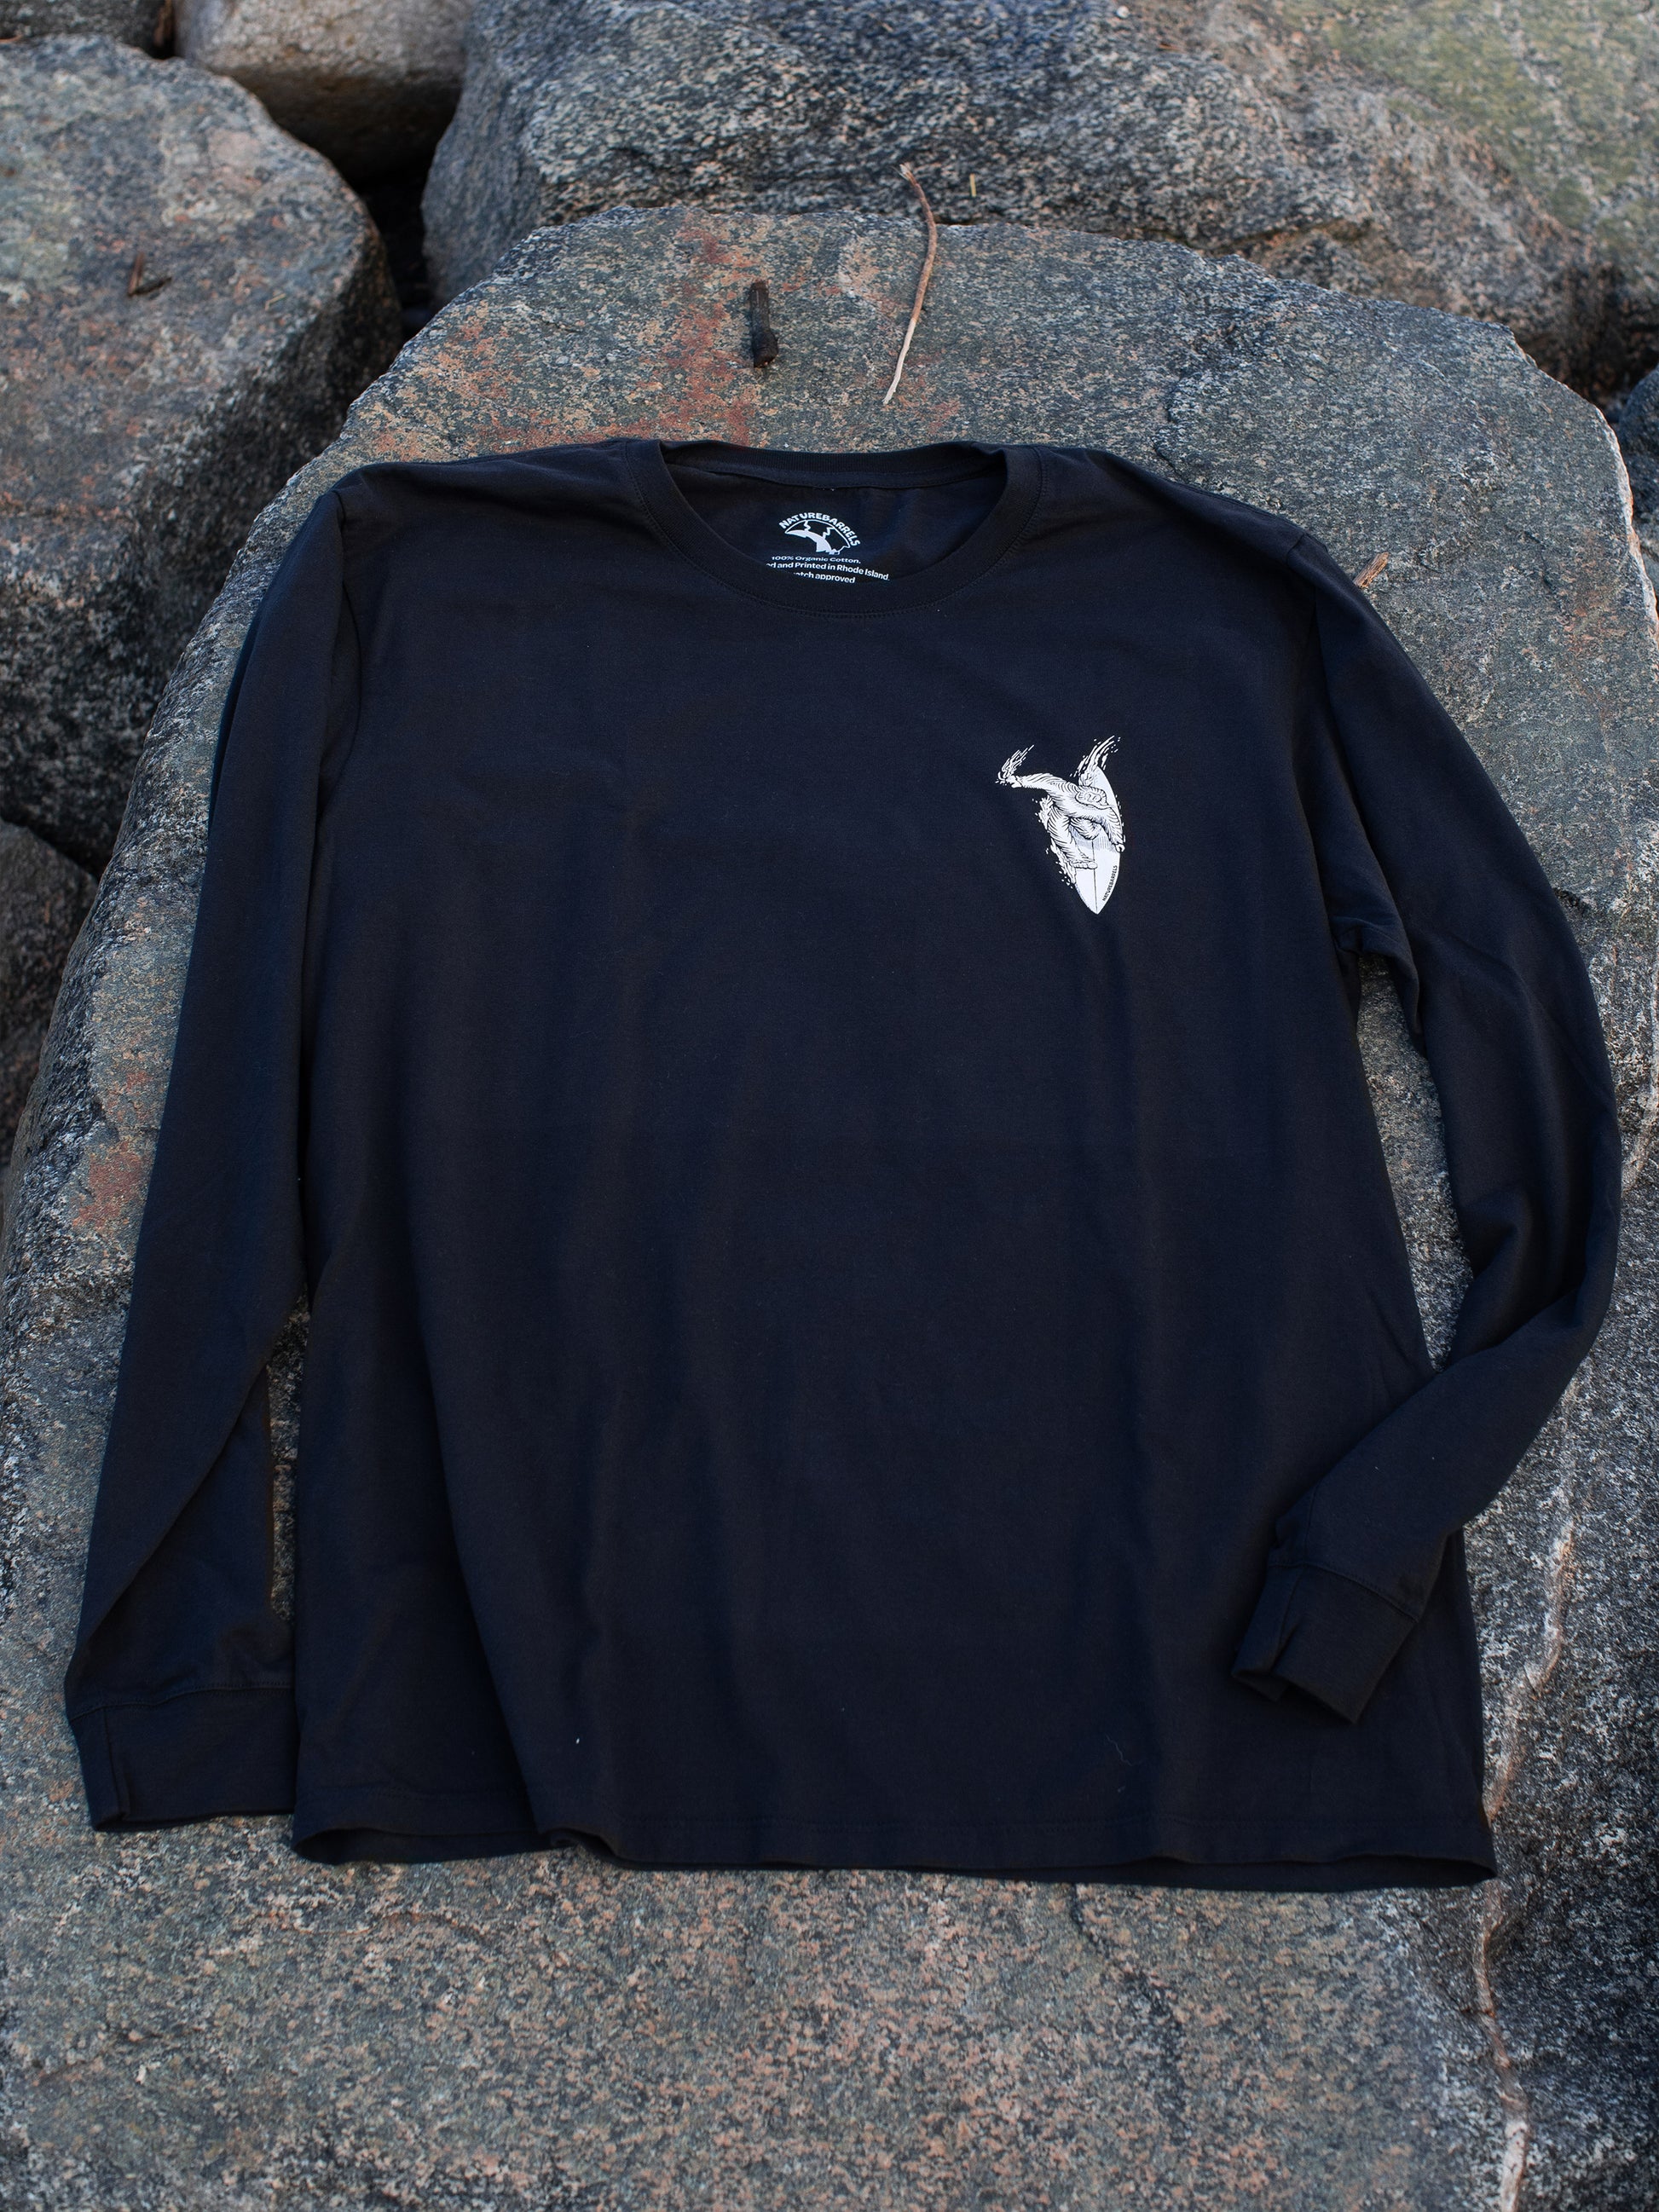 Black long sleeve t-shirt with a small white chest graphic of a surfing sasquatch. Laid on a rocky surface